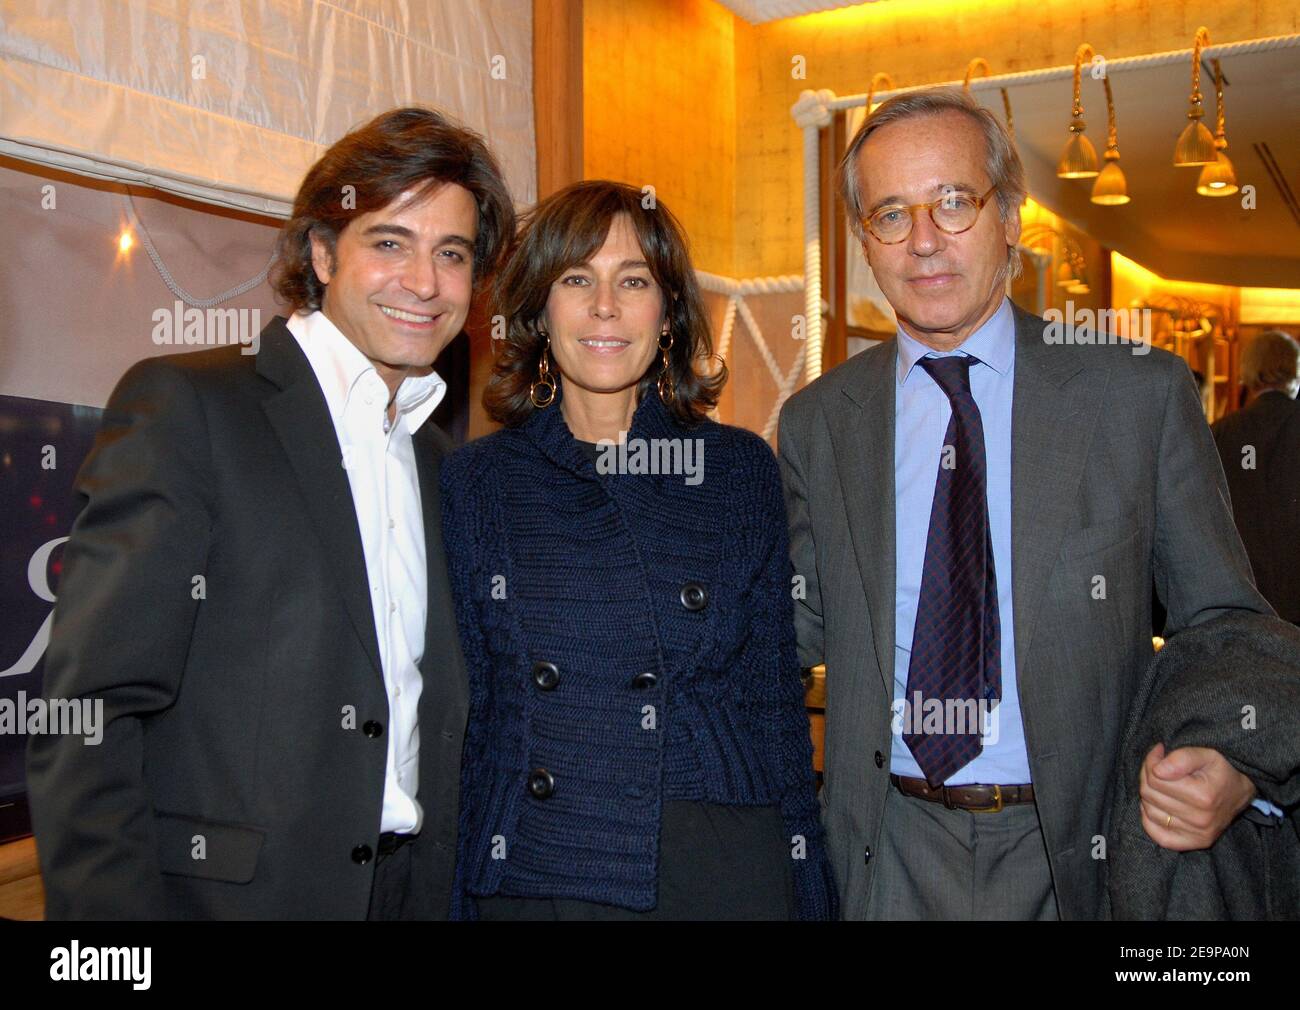 EXCLUSIVE - Star hairstylist Alexandre Zouari, French autor Christine Orban and her husband Olivier Orban attend a party for the presentation of Zouaris new book in Paris, France, on November 16, 2006. Photo by Christophe Guibbaud/ABACAPRESS.COM Stock Photo